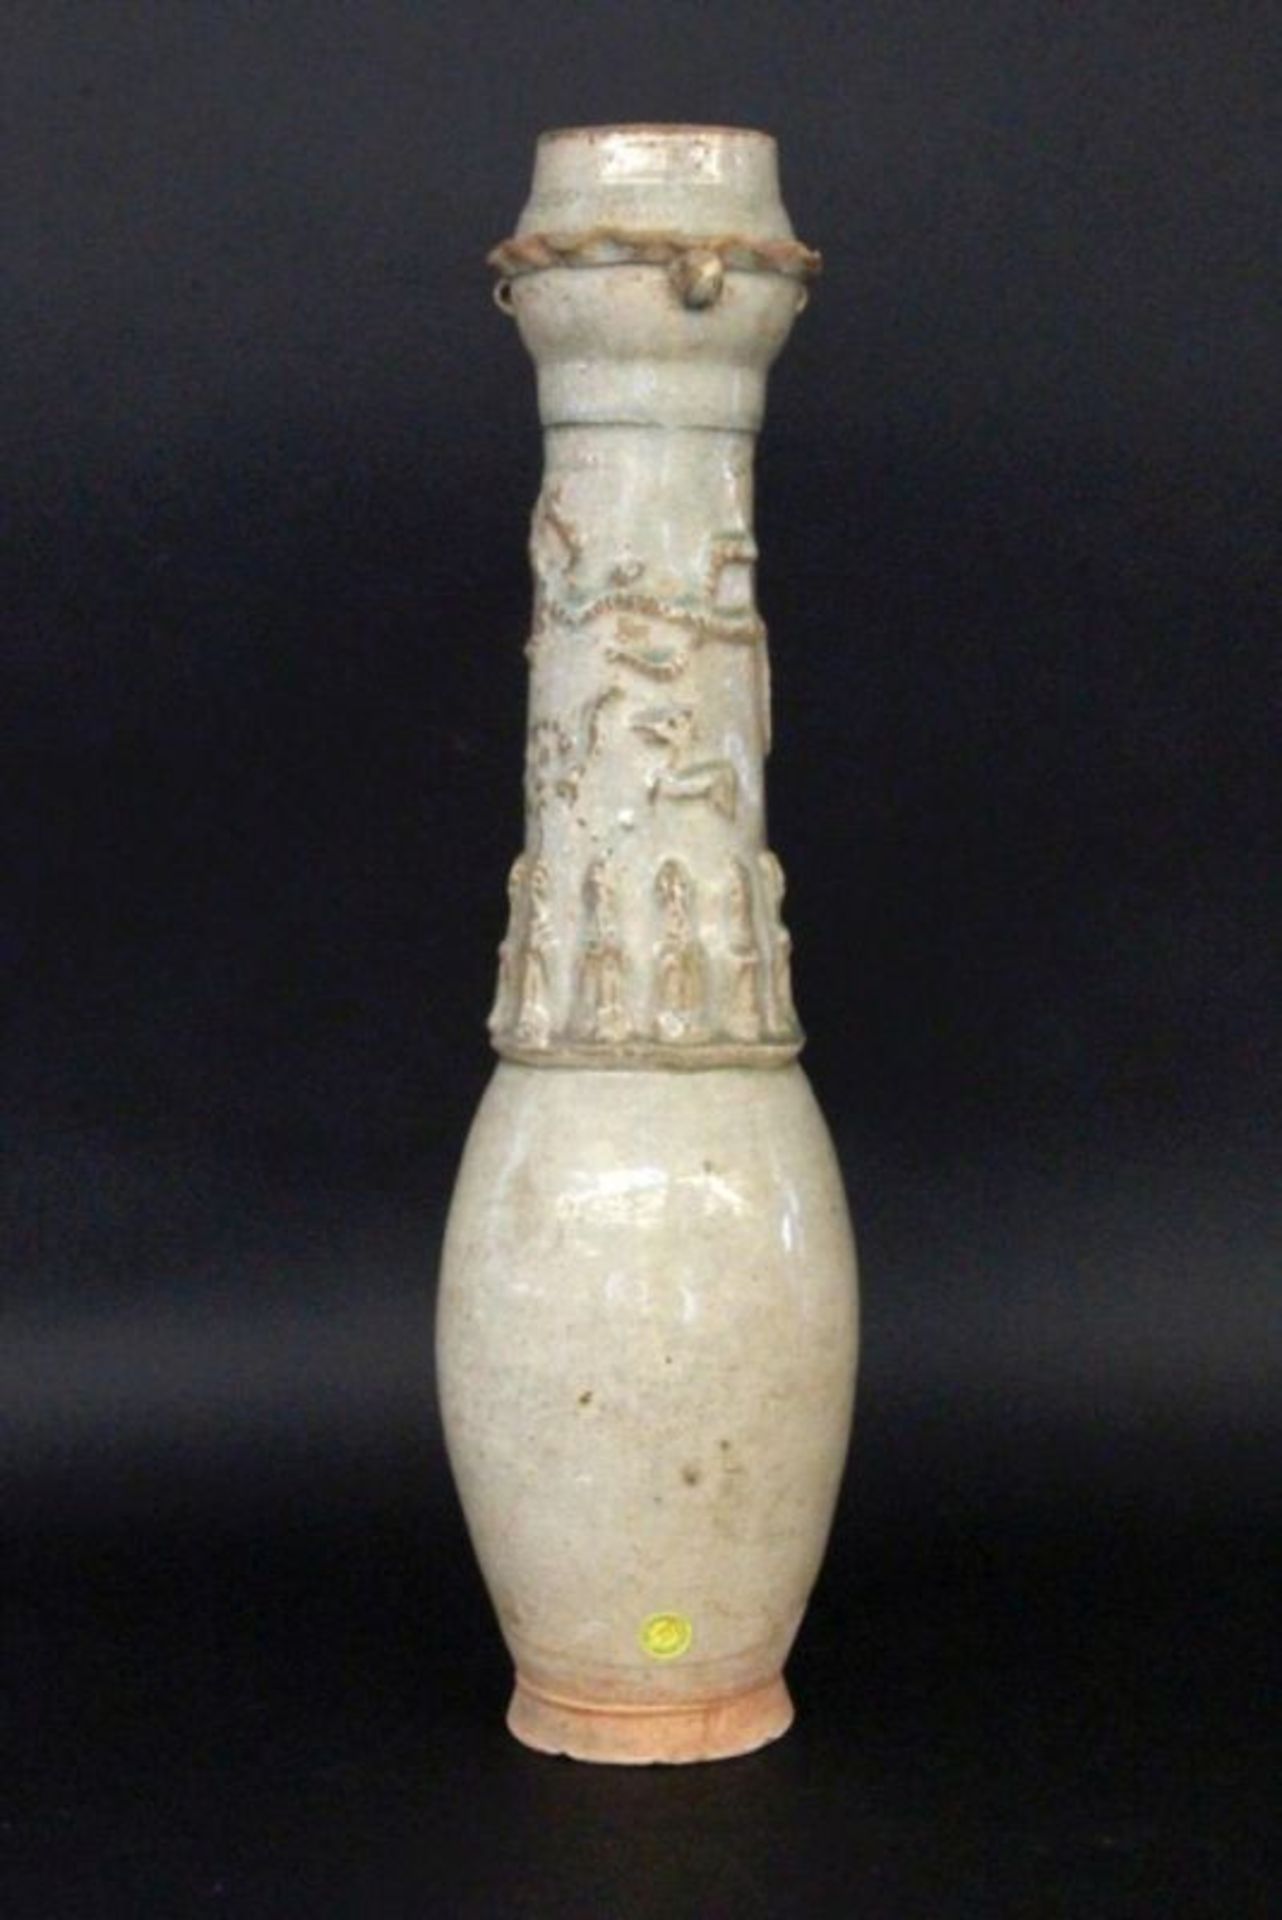 A VASE China, probably Yuan dynasty 1206-1368 Slim cone shape with figural reliefdecoration (Ying